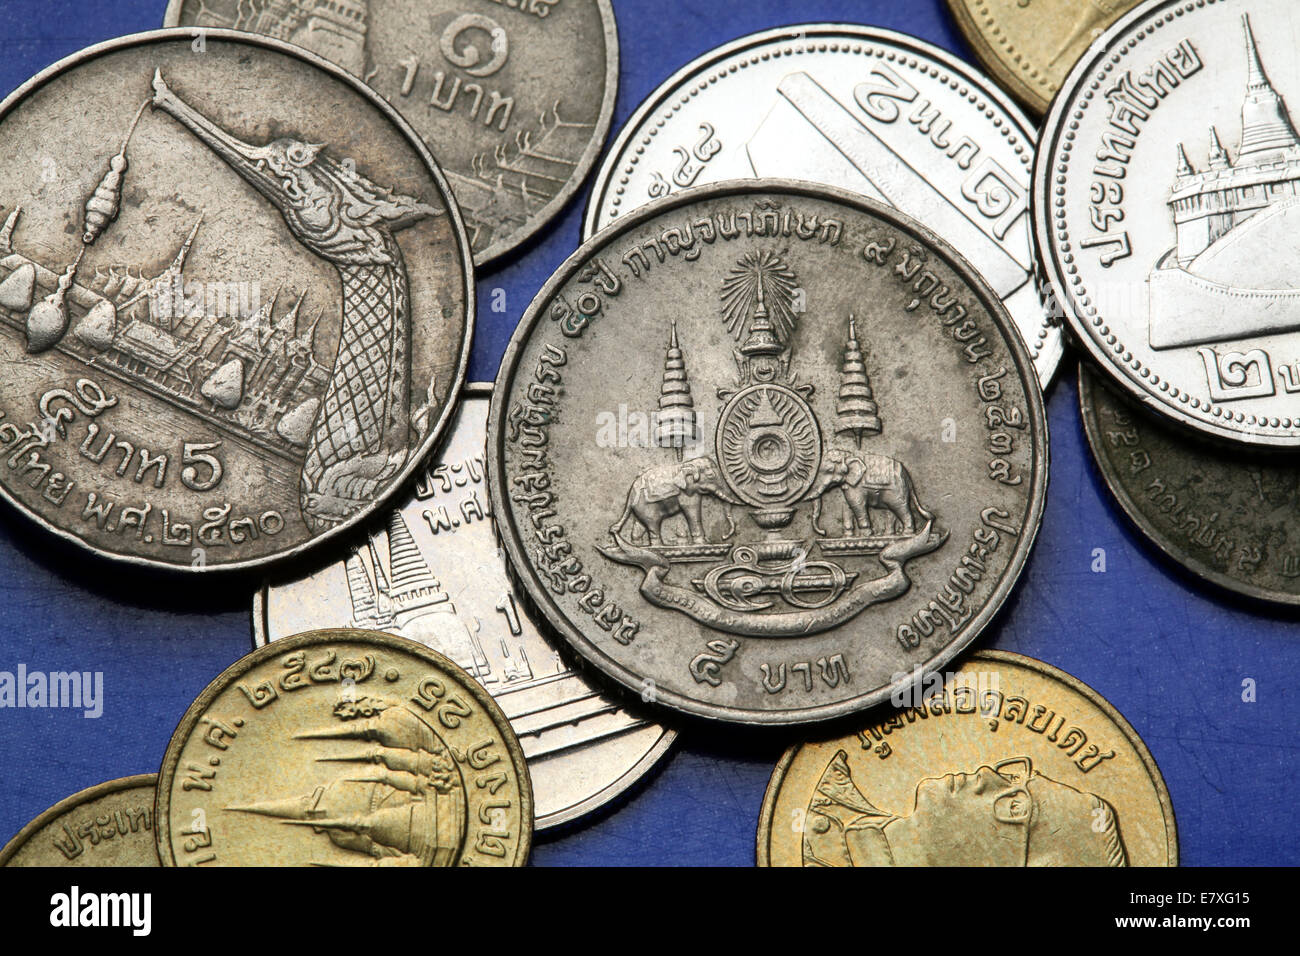 Thailand coin dating